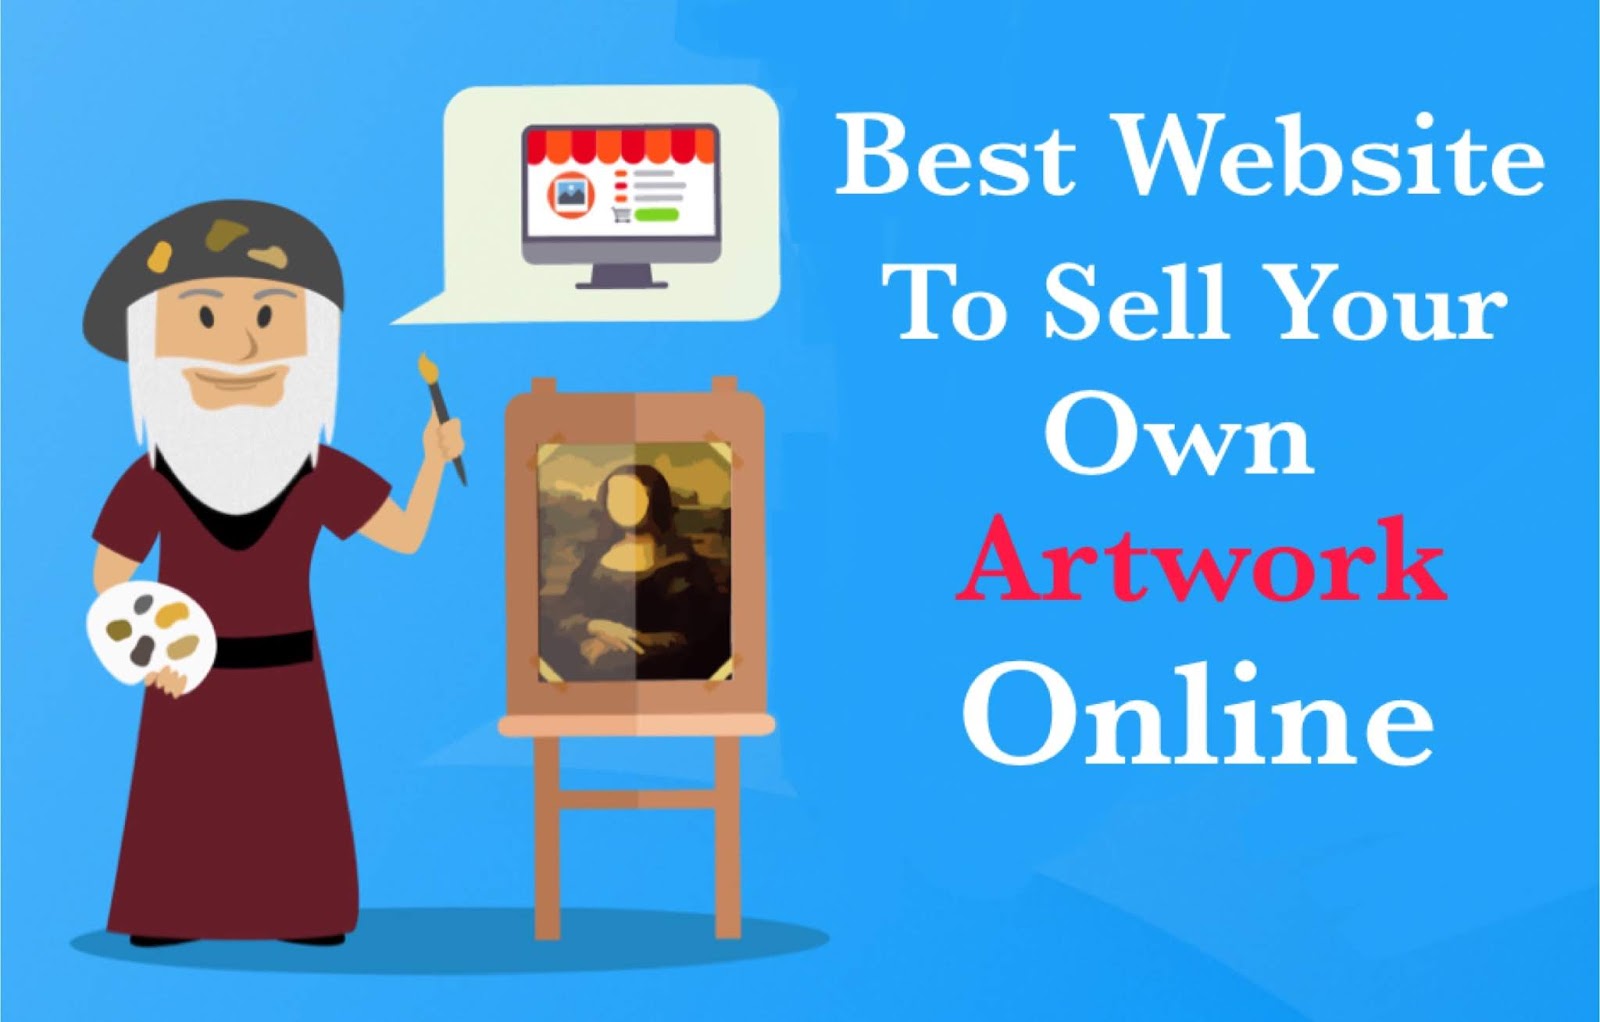 write about the various websites available for selling artwork